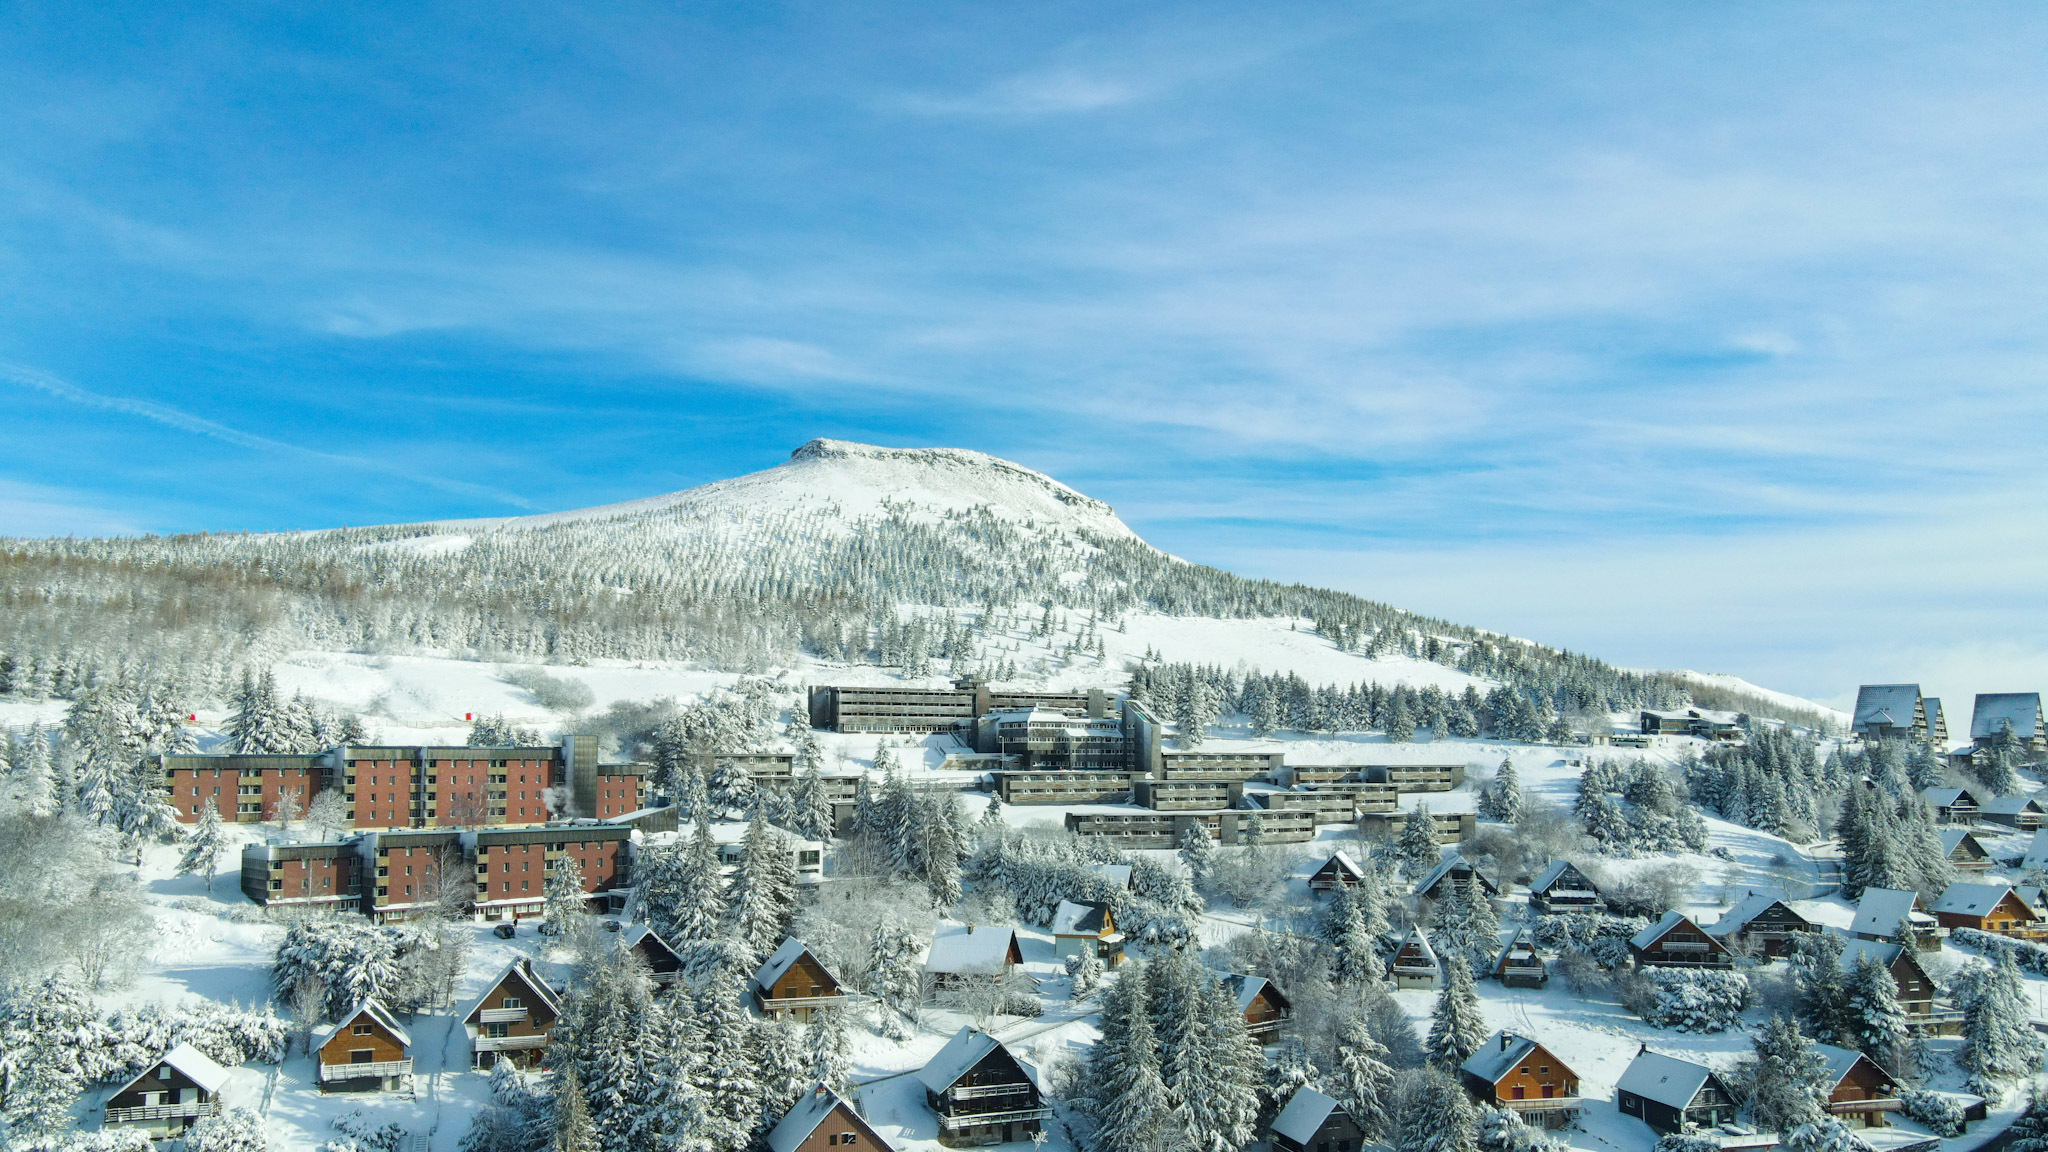 Super Besse ski resort, the VVF Holiday Village and the Belambra Club under the Snow